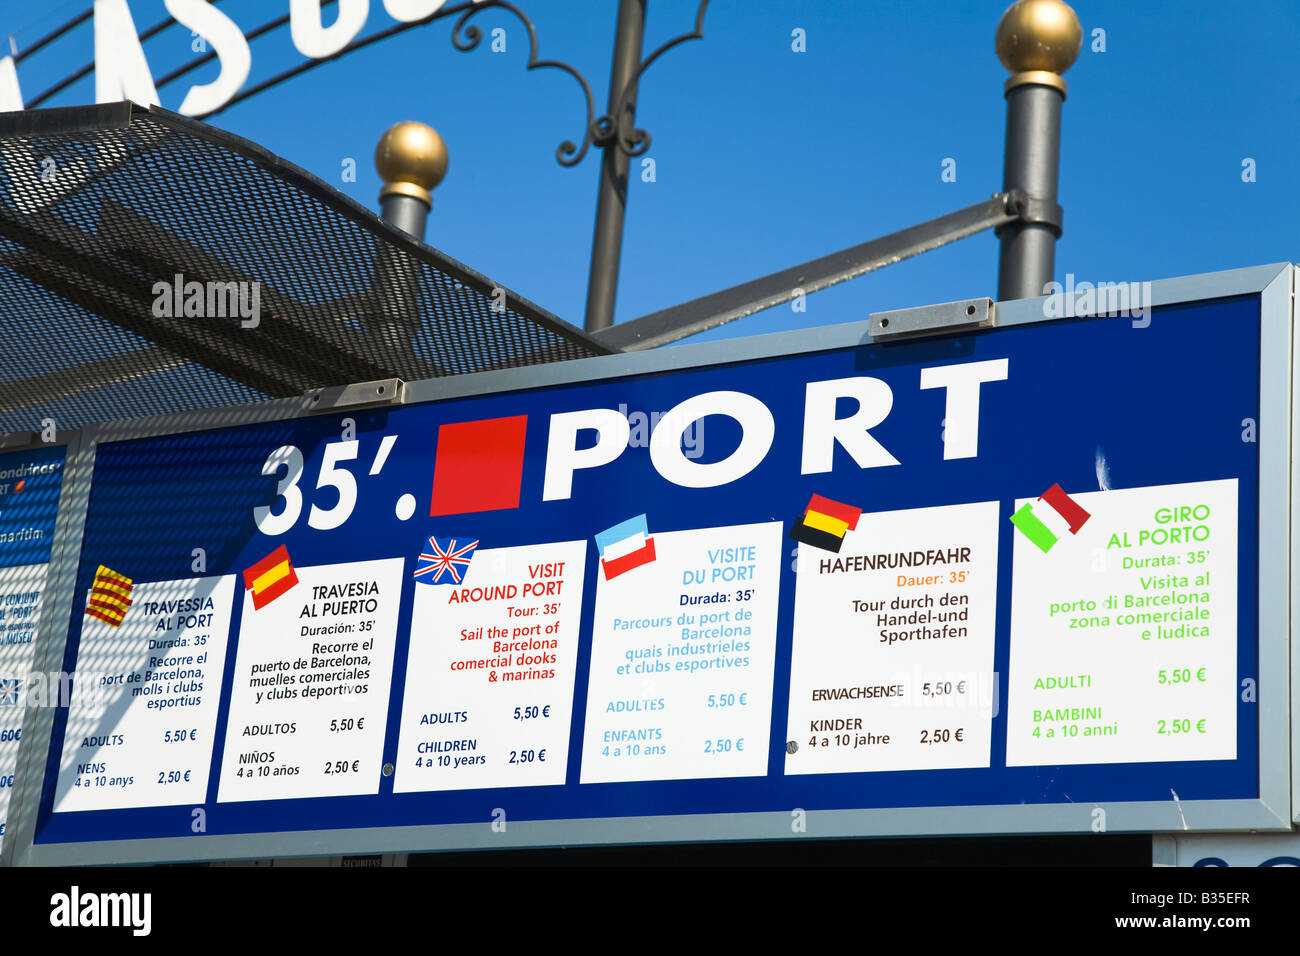 SPAIN Barcelona Sign in six different languages describe available boat tours in Marina Port Vell prices in Euros Stock Photo